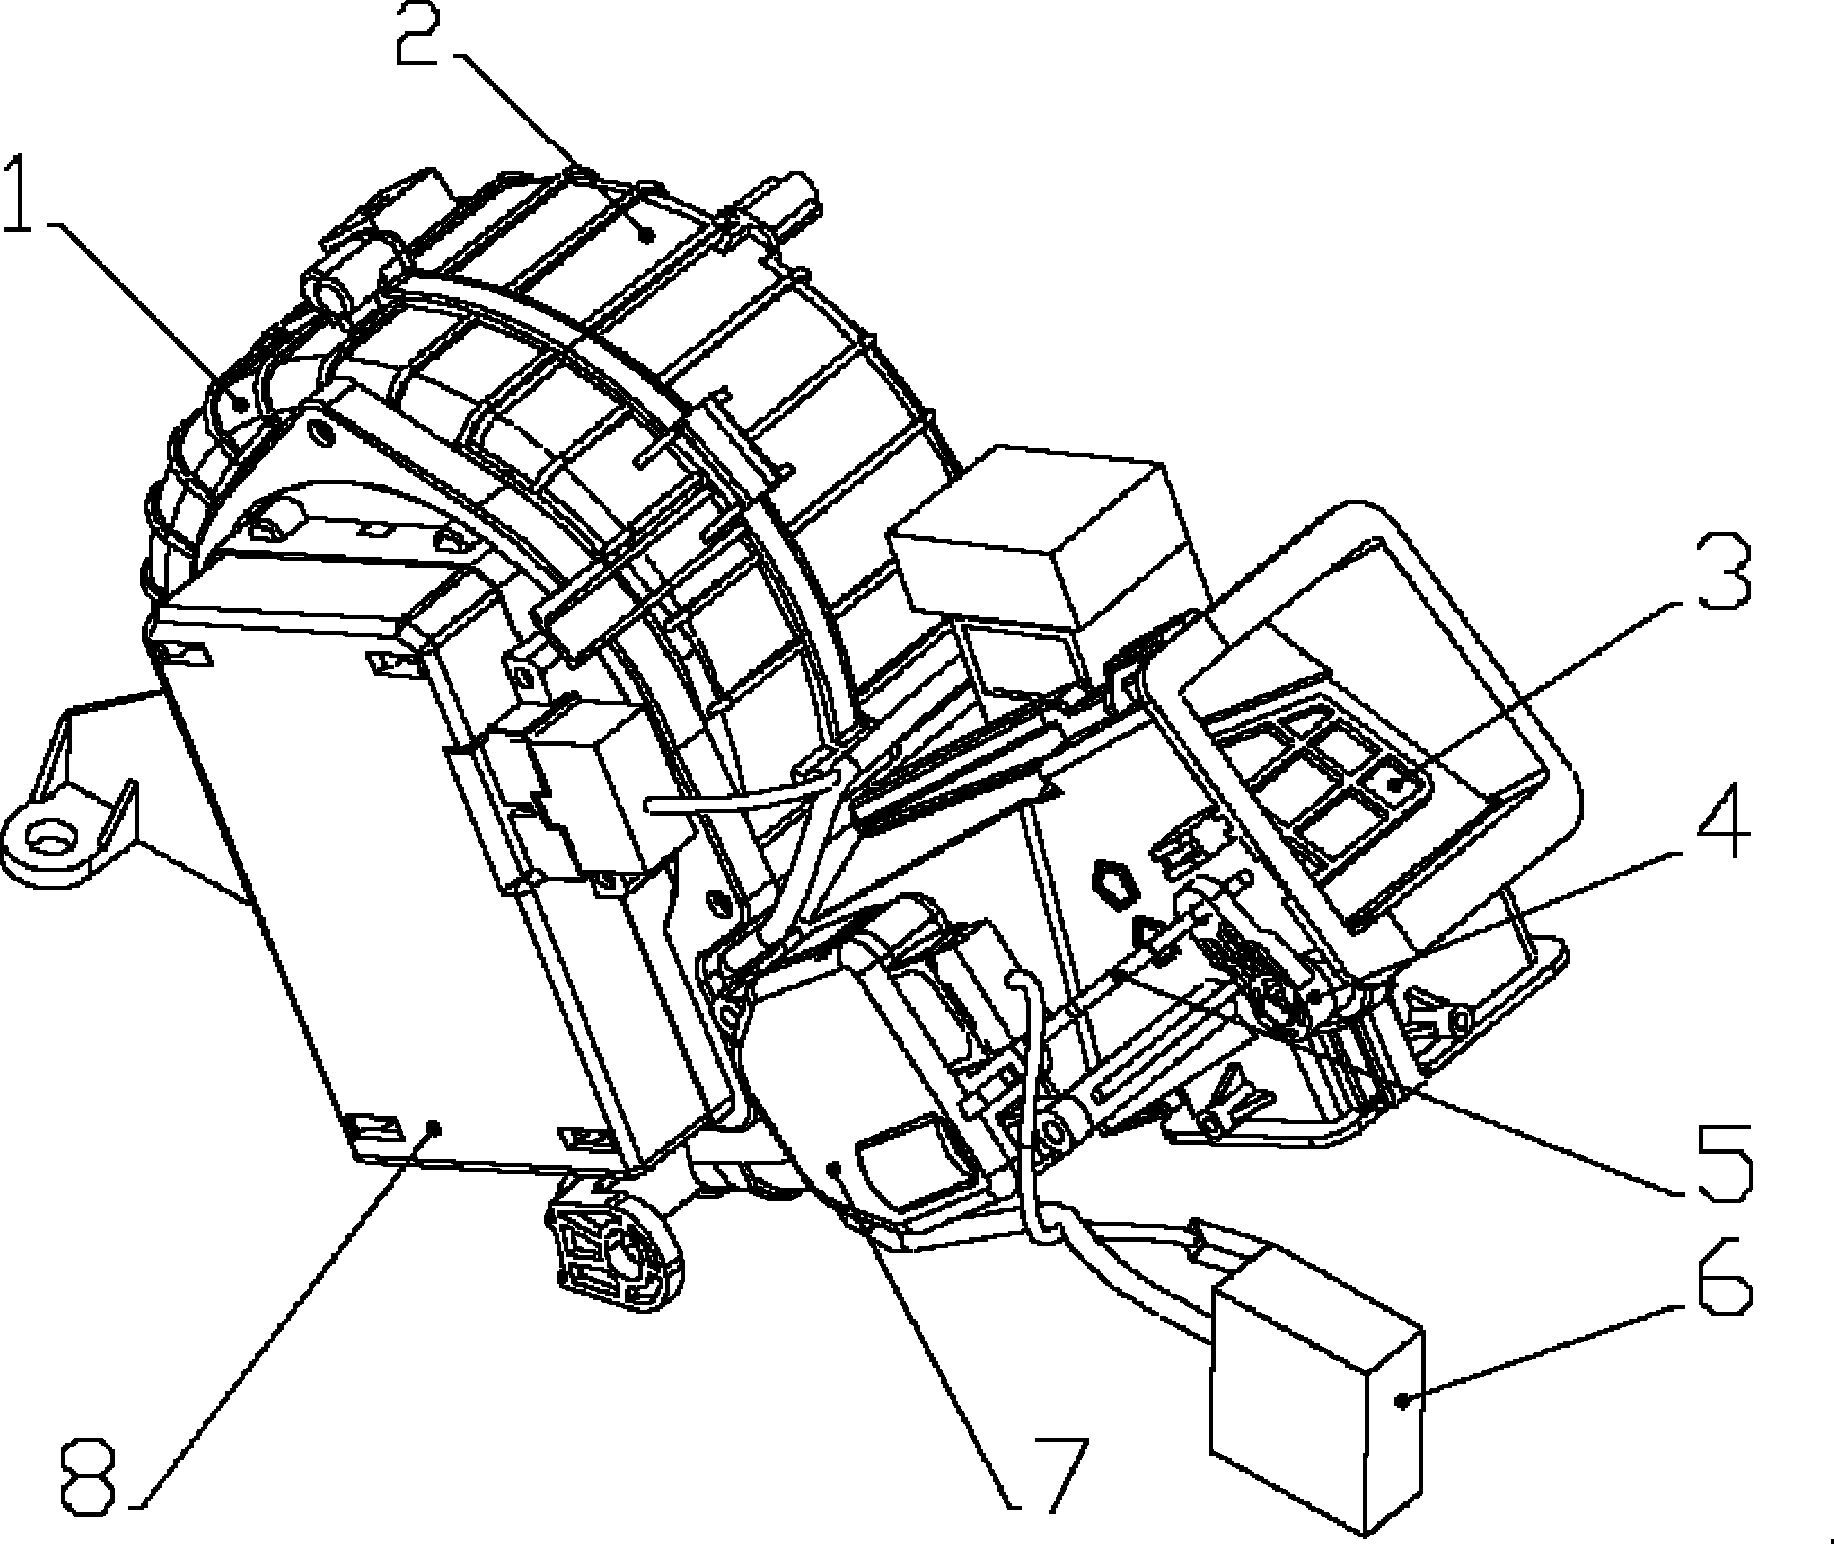 Back row air blowing mechanism for vehicle air conditioner